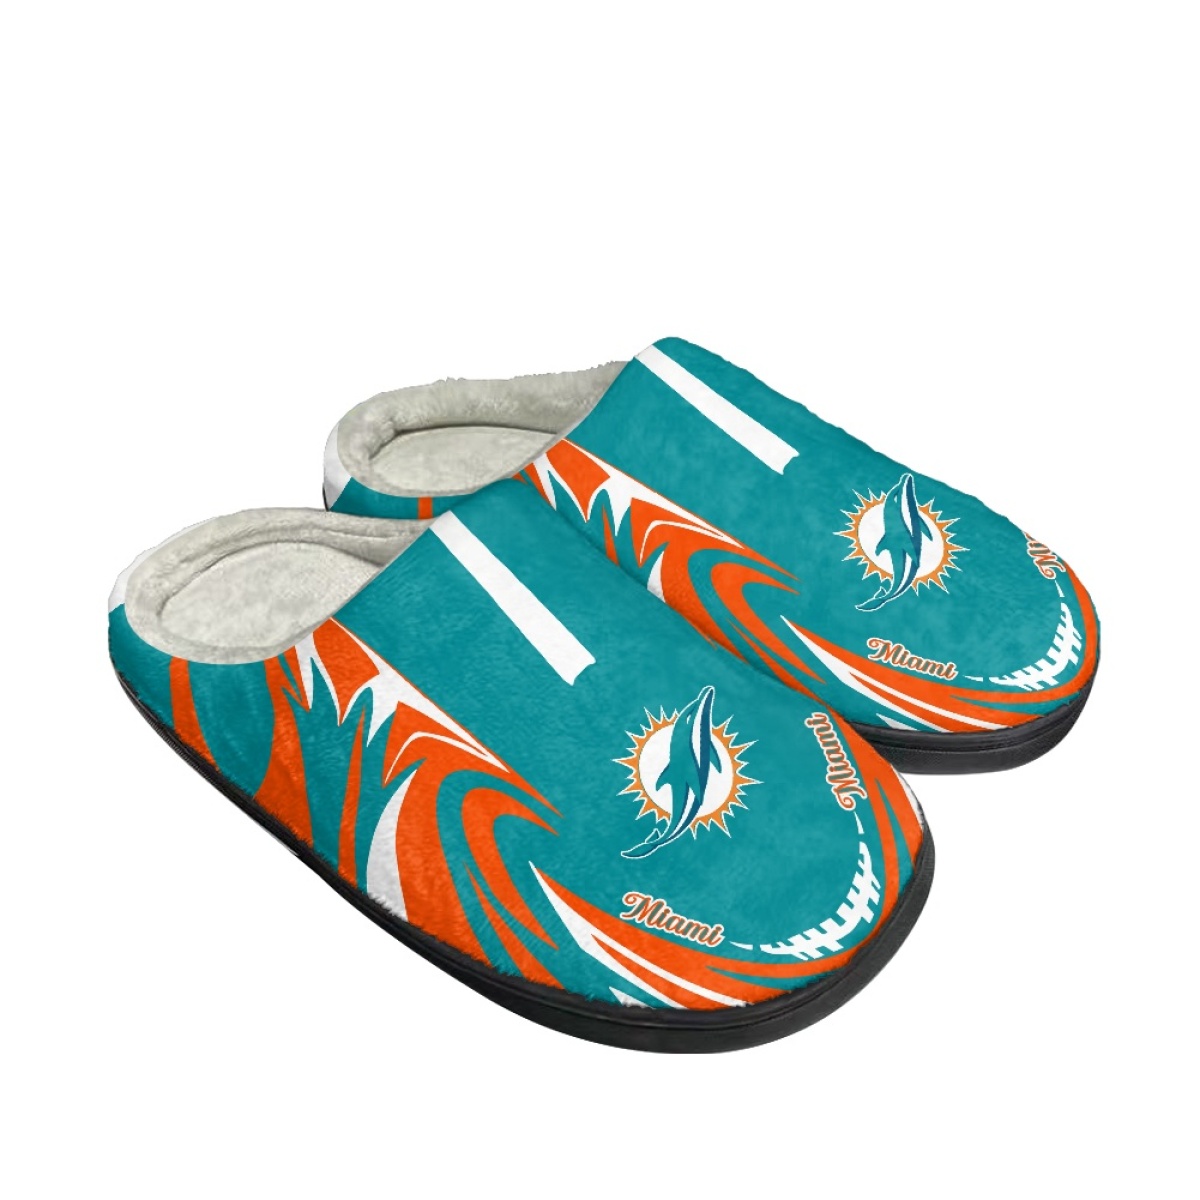 Men's Miami Dolphins Slippers/Shoes 004